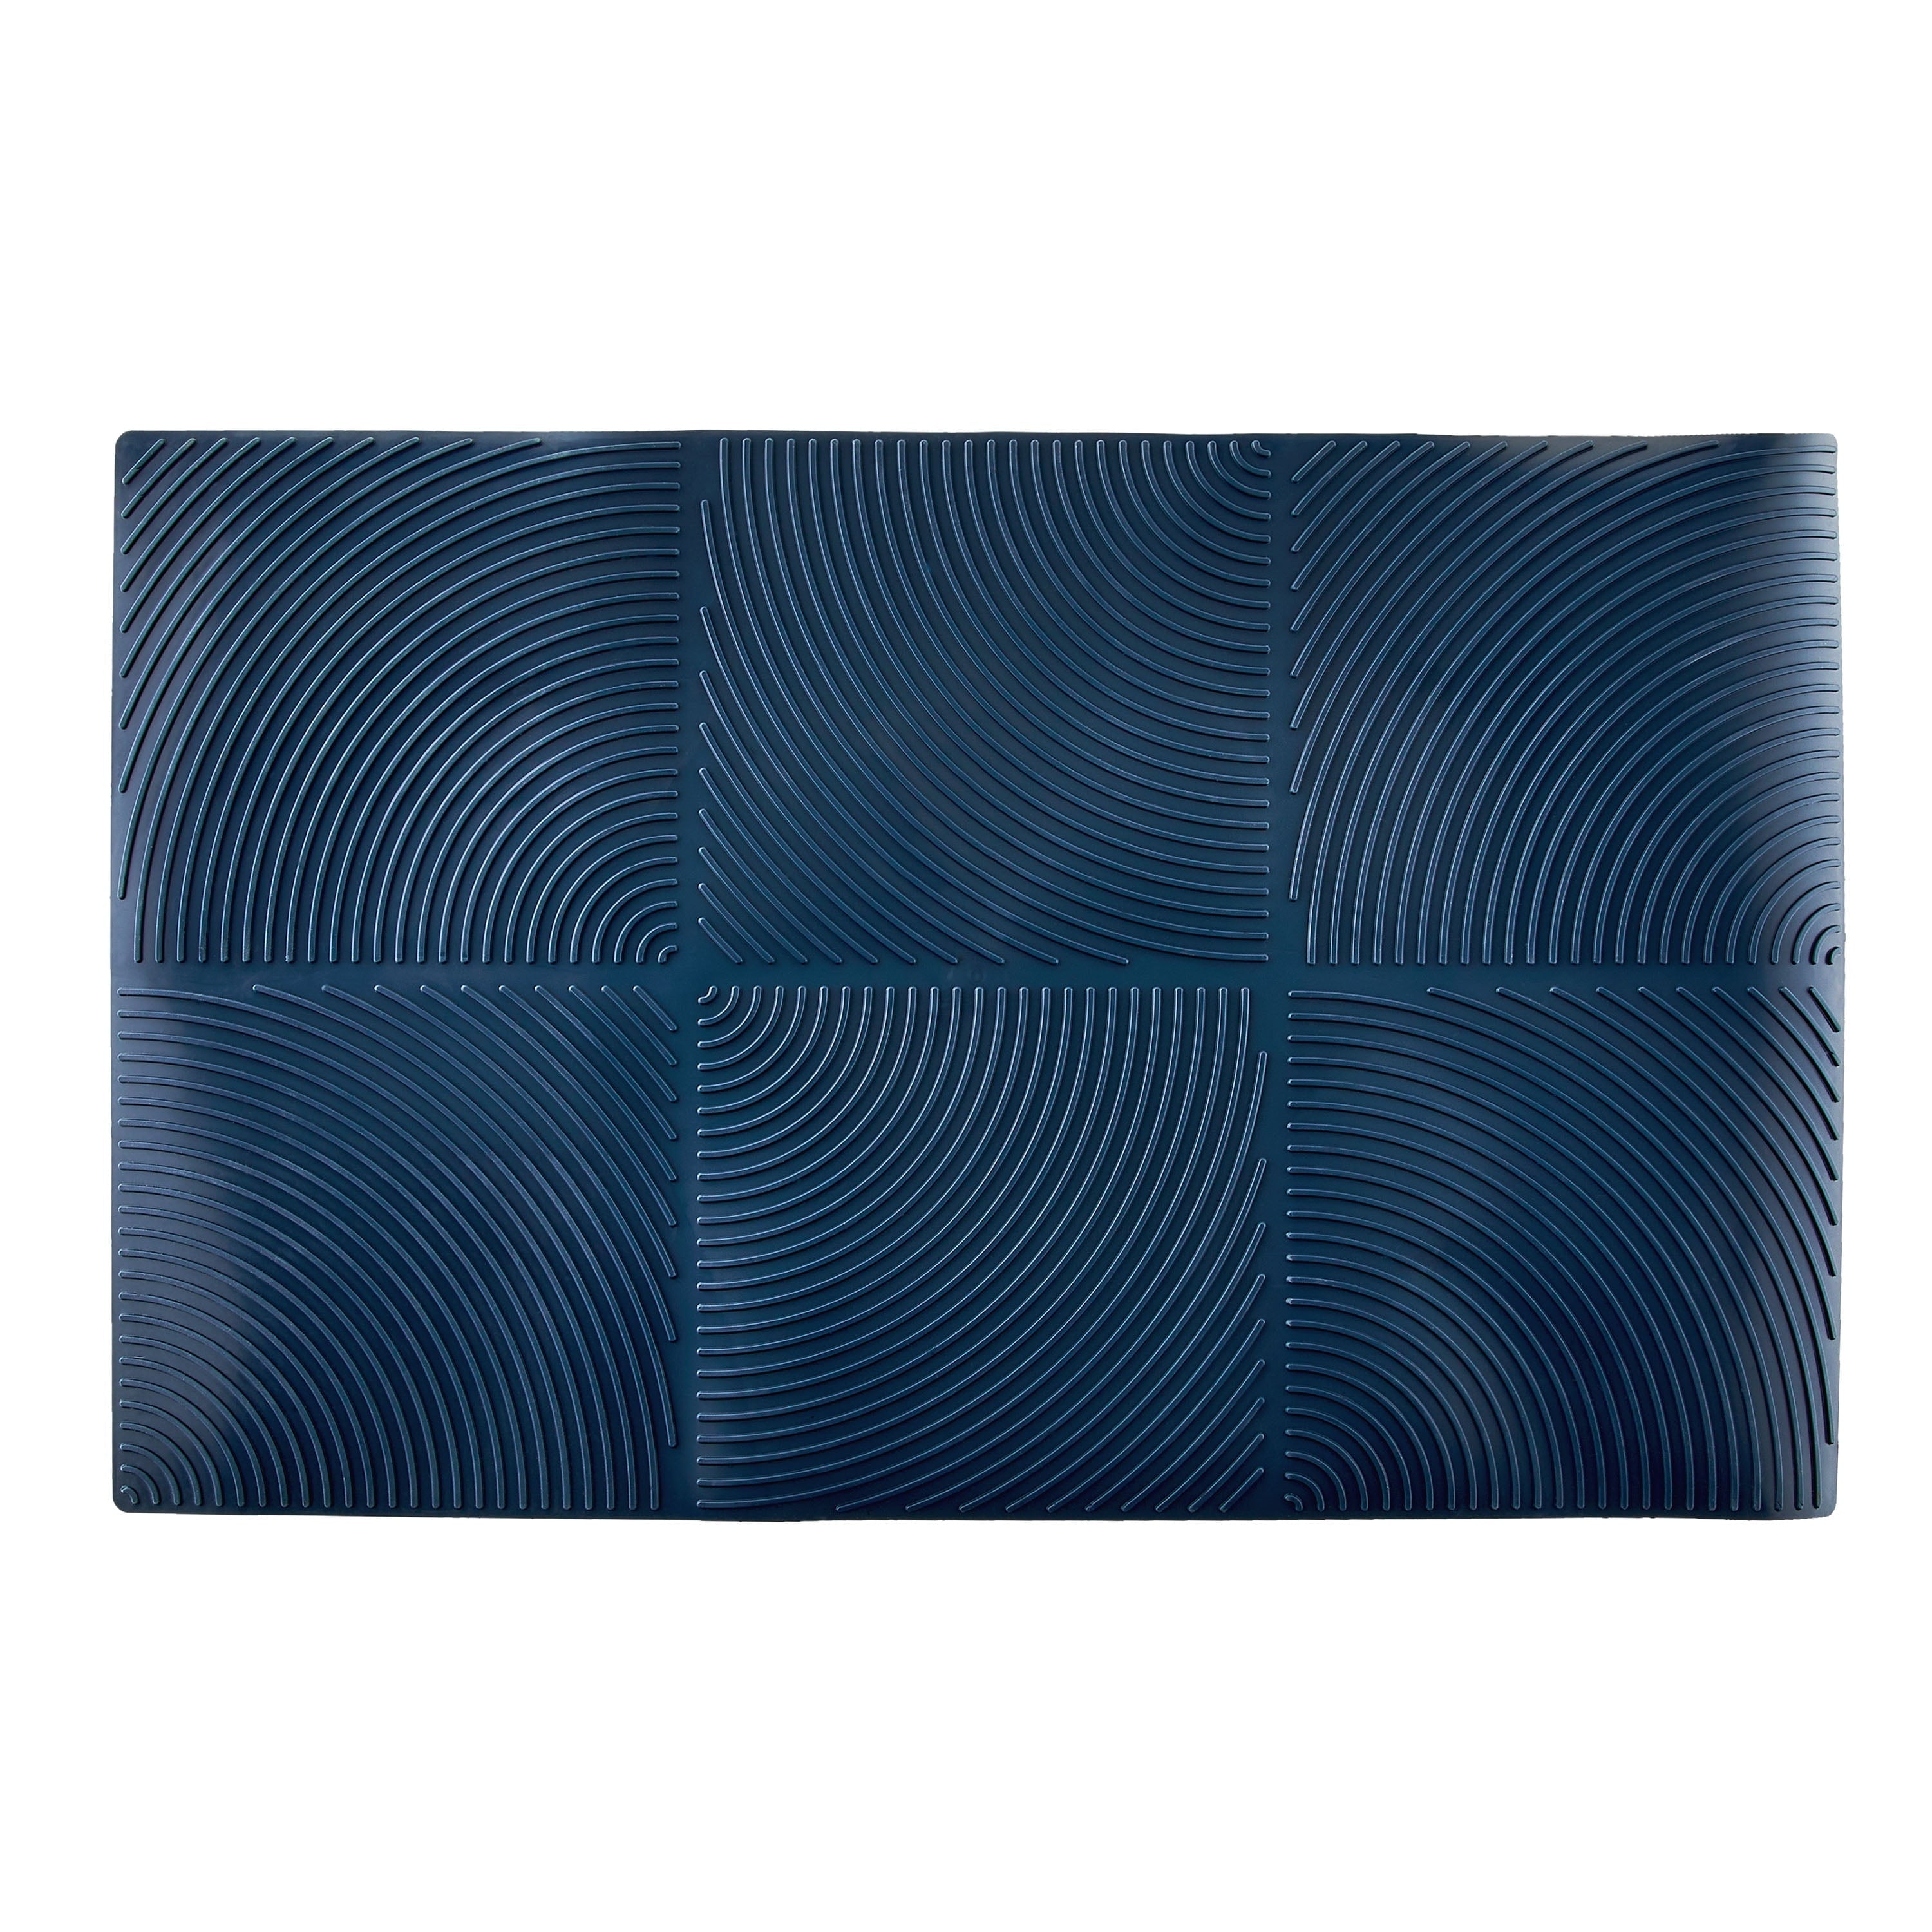 Wholesale prices with free shipping all over United States Vibrant Life Ridged Litter Trapper Mat, Dark Blue - Steven Deals